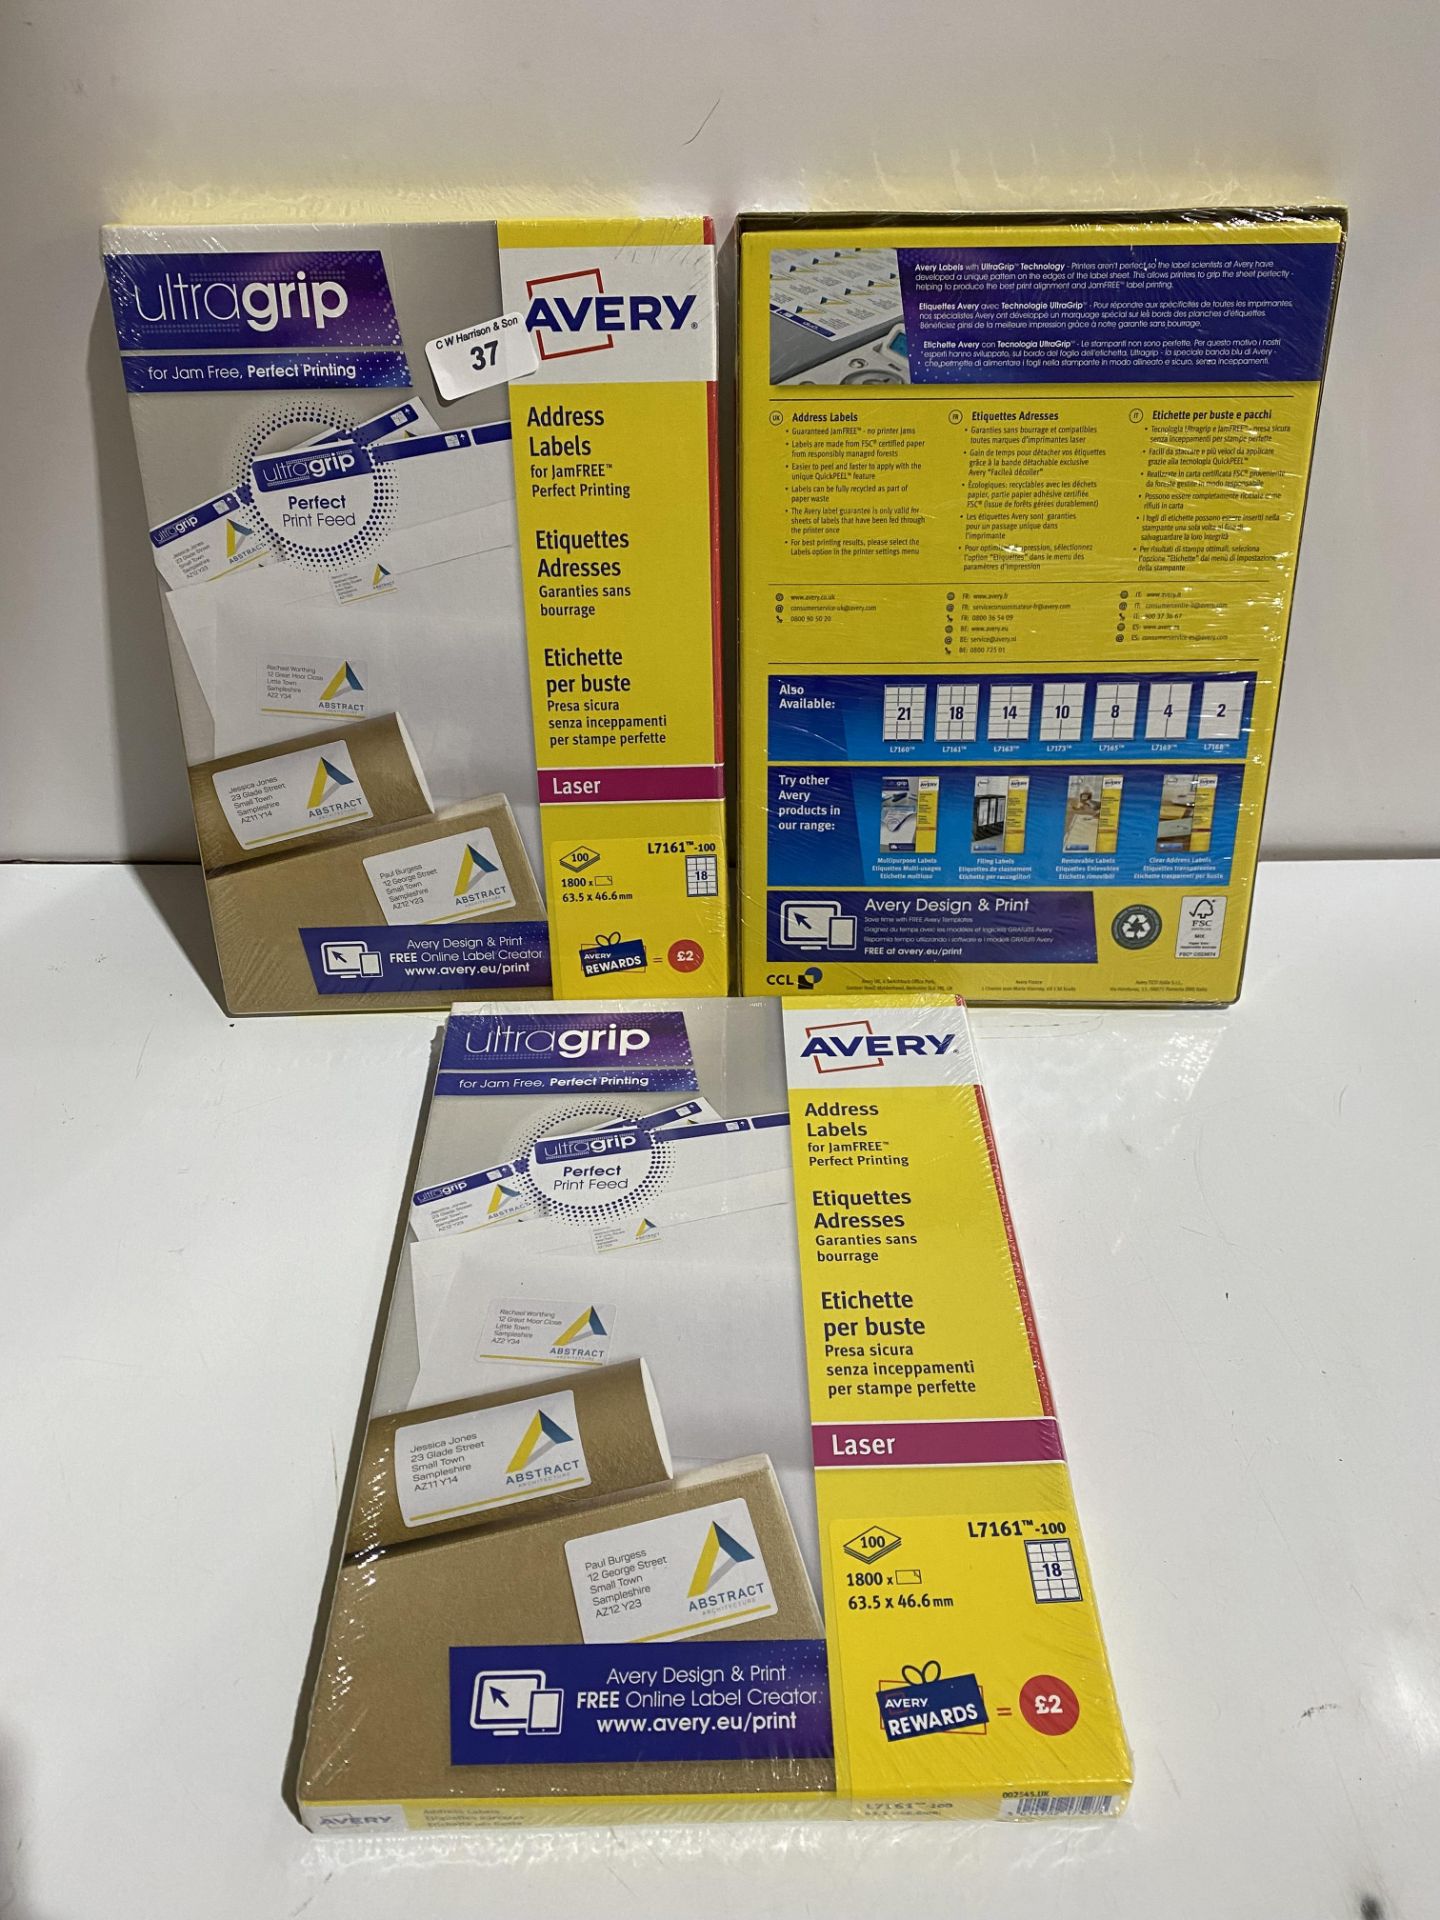 3 x packs of 100 sheets each Avery laser address labels A4 18 labels per sheet